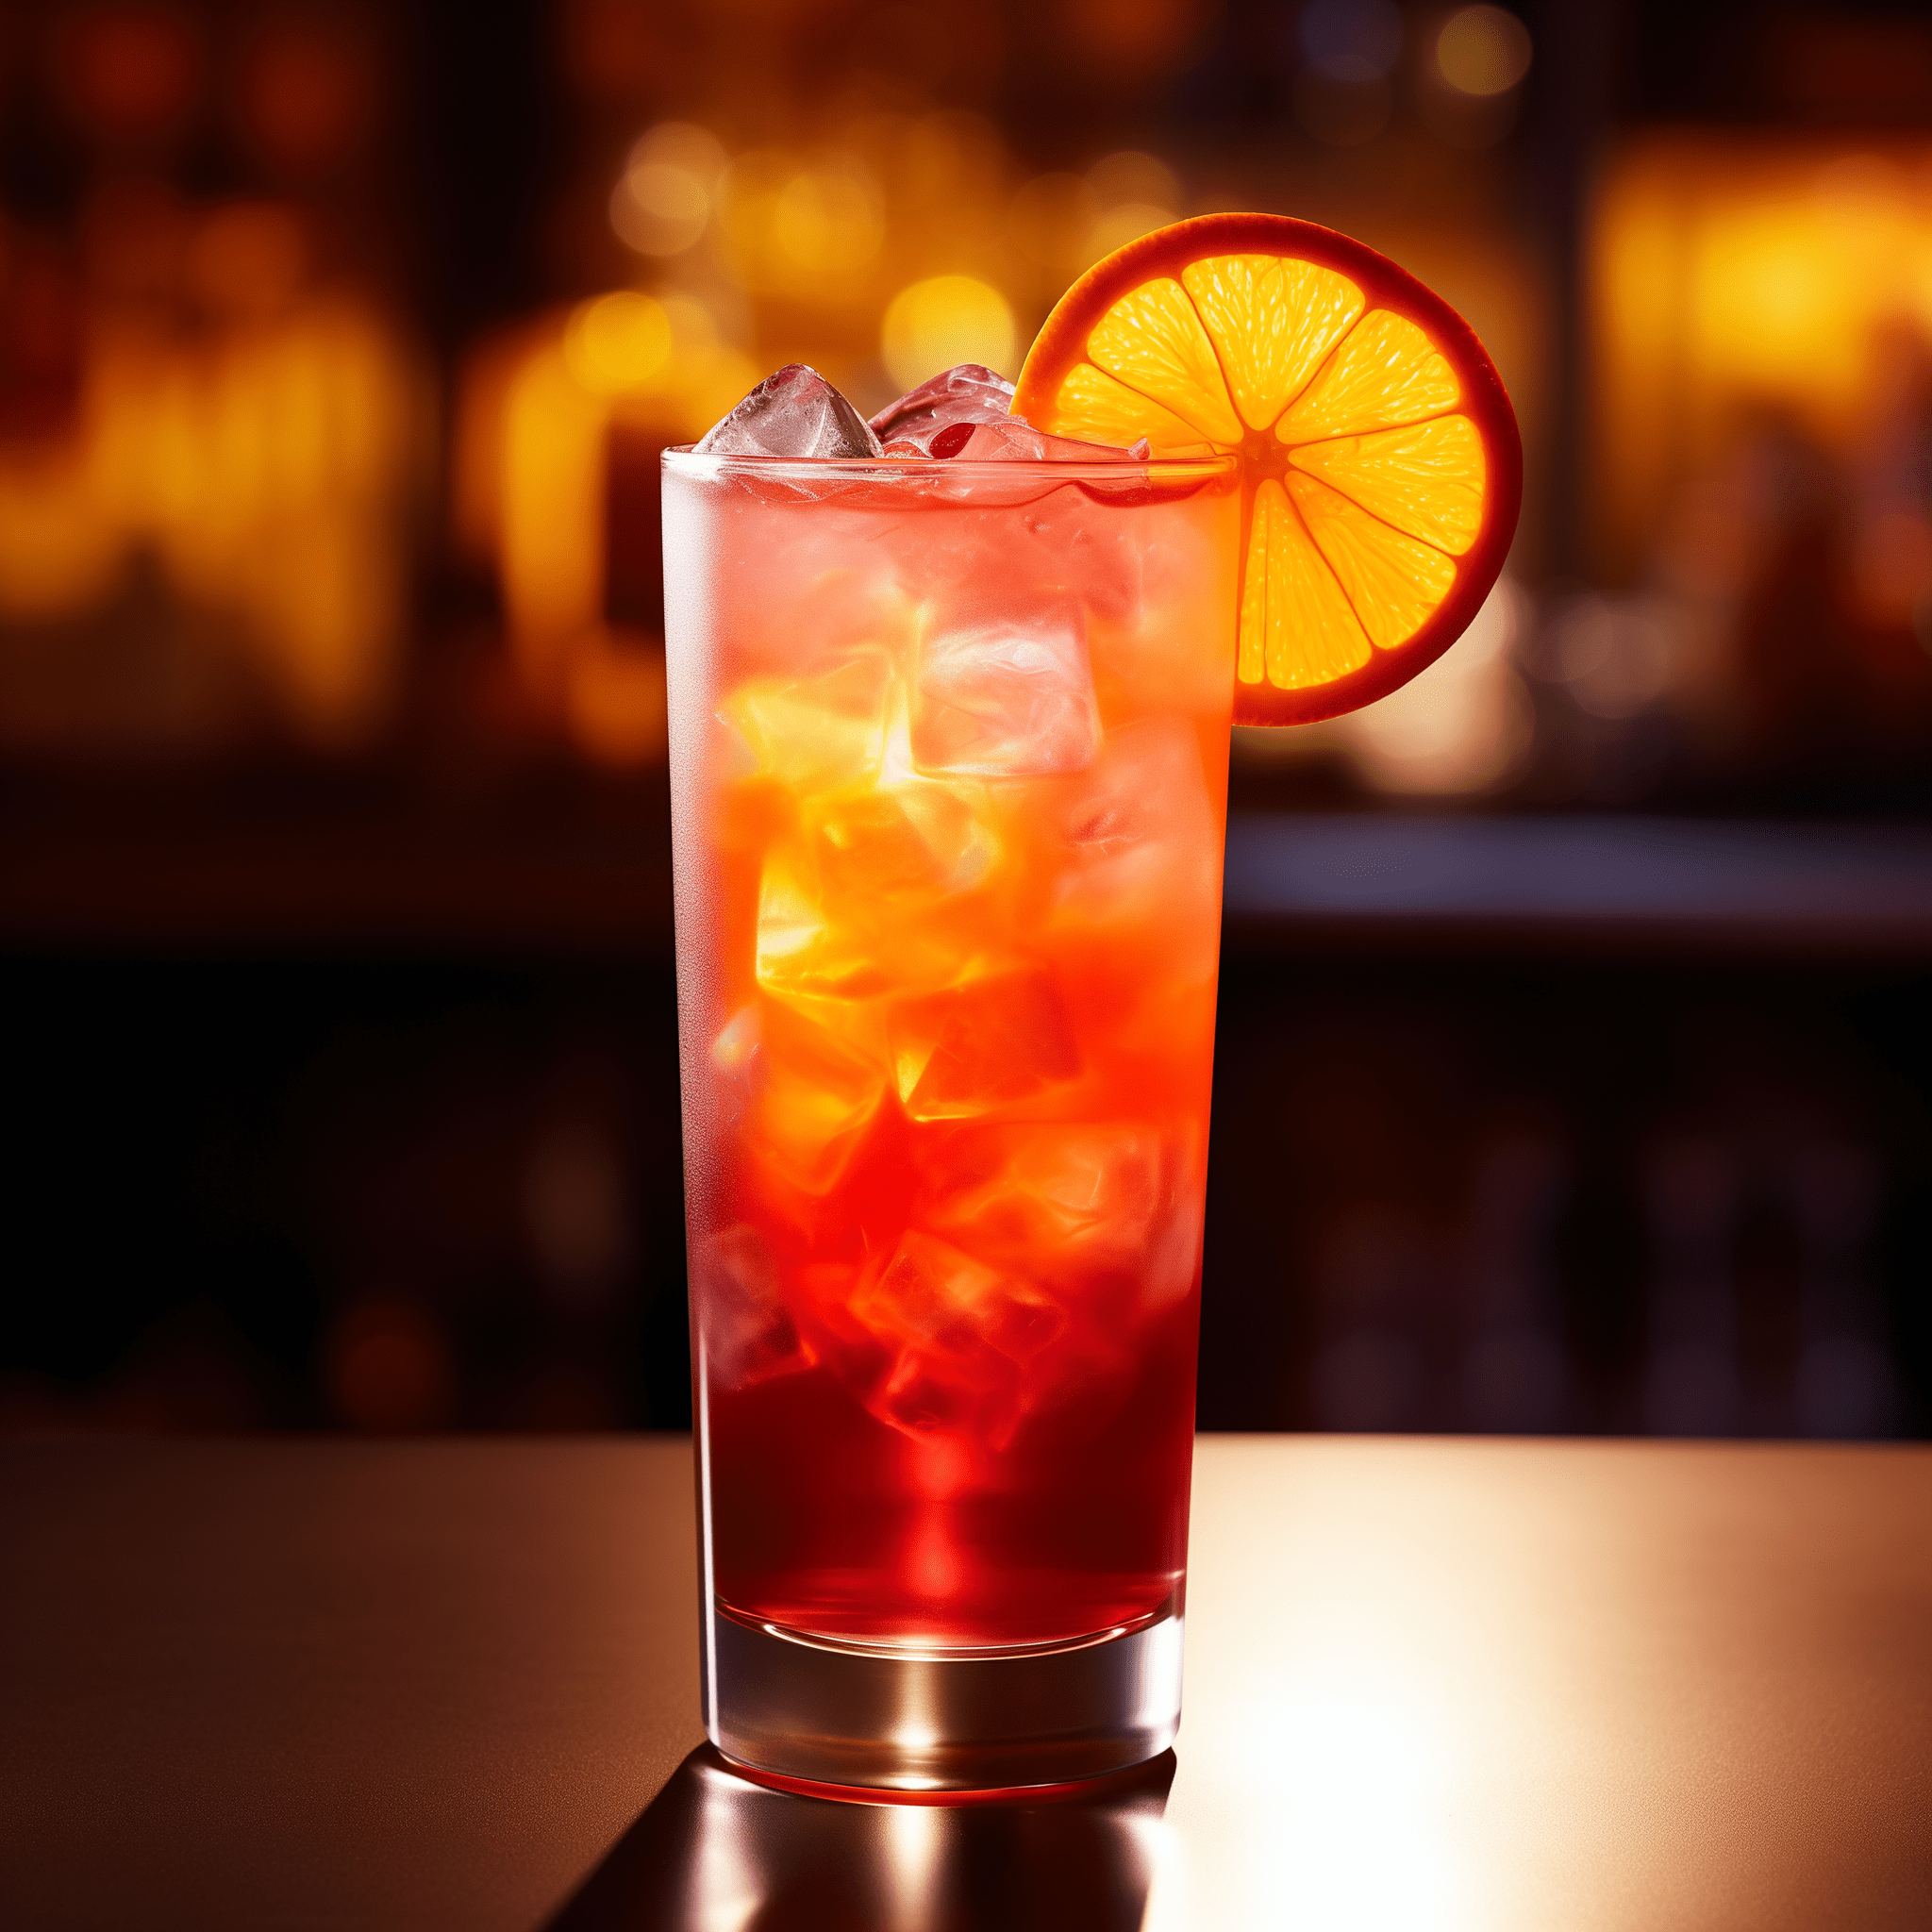 Cassis Orange Cocktail Recipe - The Cassis Orange is sweet with a slight tartness from the orange juice. The crème de cassis provides a deep berry flavor that is both rich and refreshing.